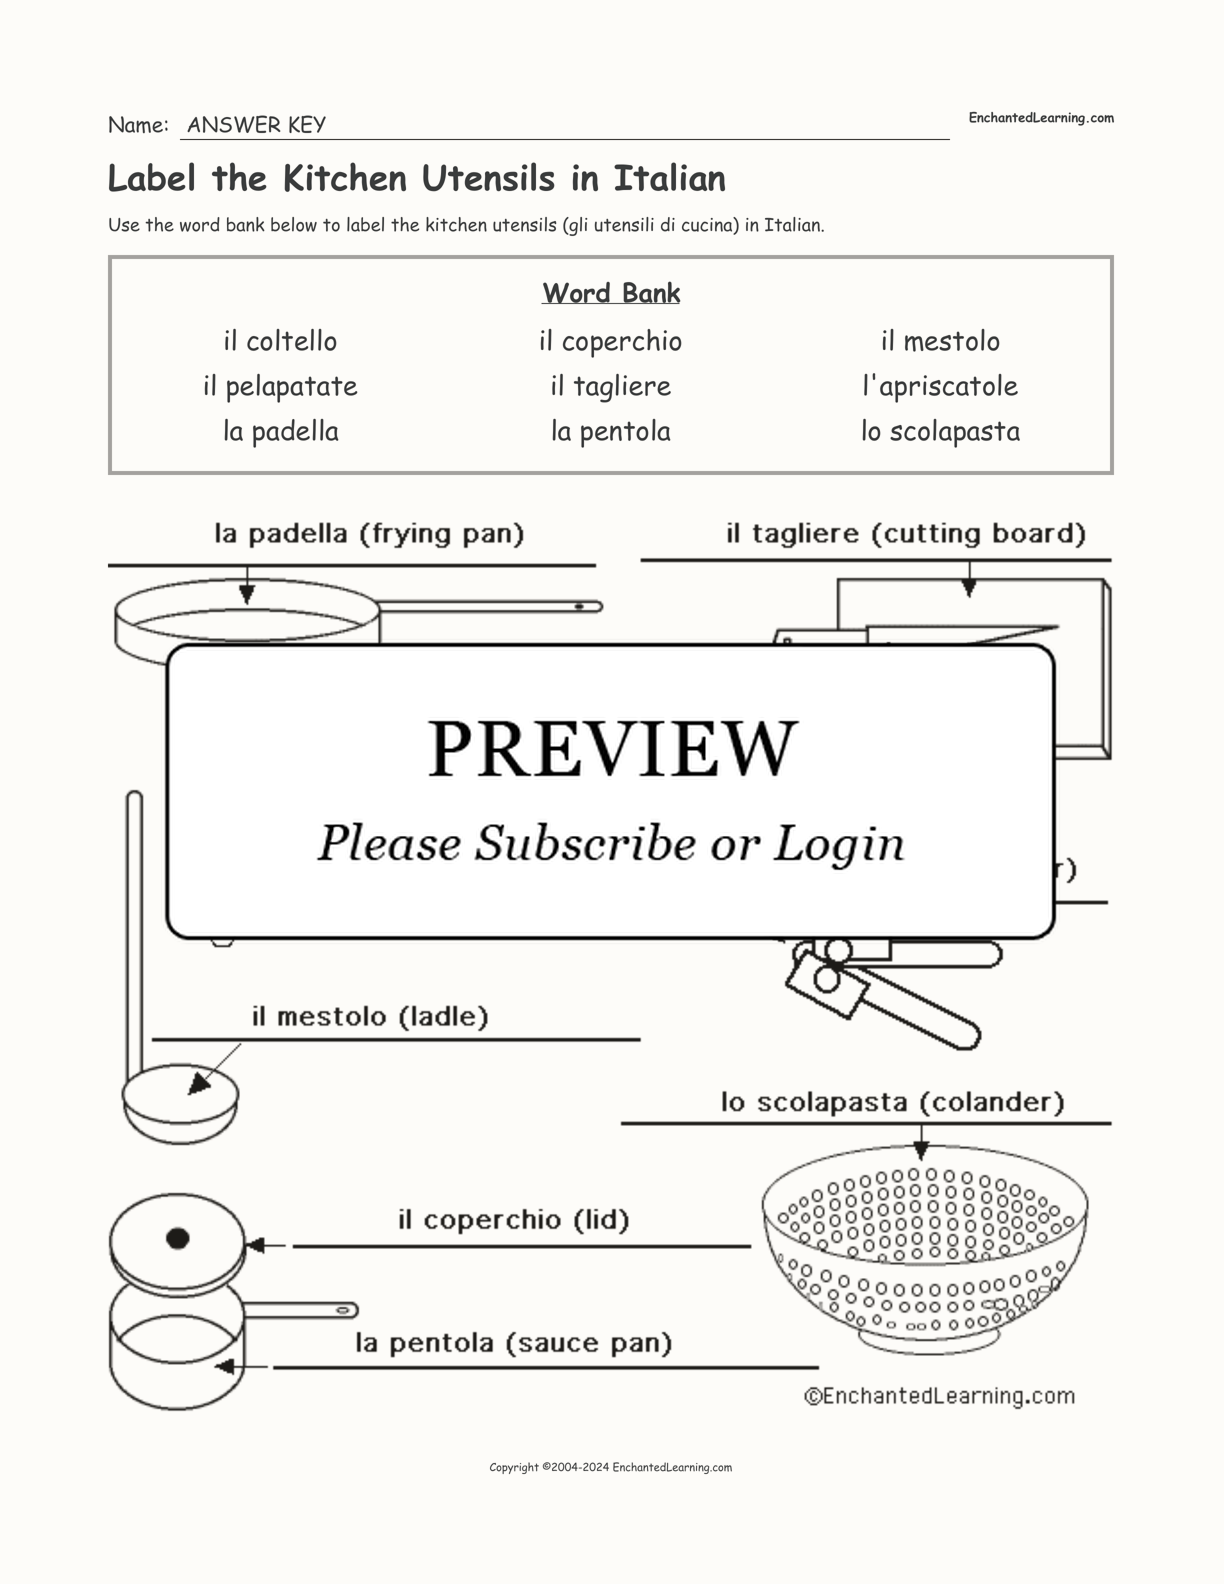 Label the Kitchen Utensils in Italian interactive worksheet page 2